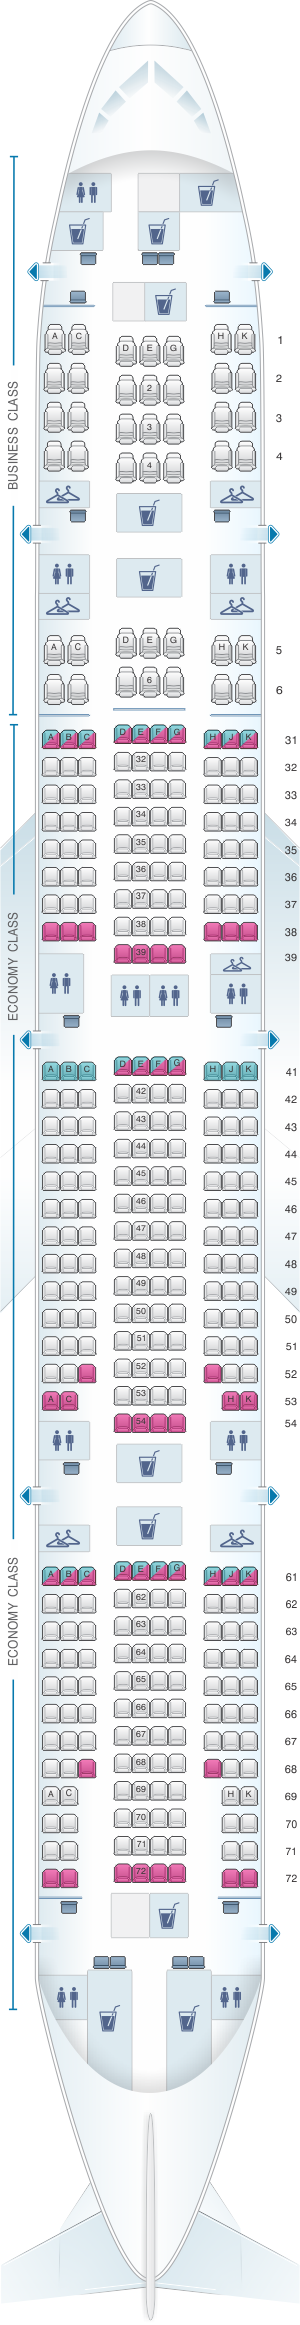 Seat map for Philippine Airlines Boeing B777 300ER